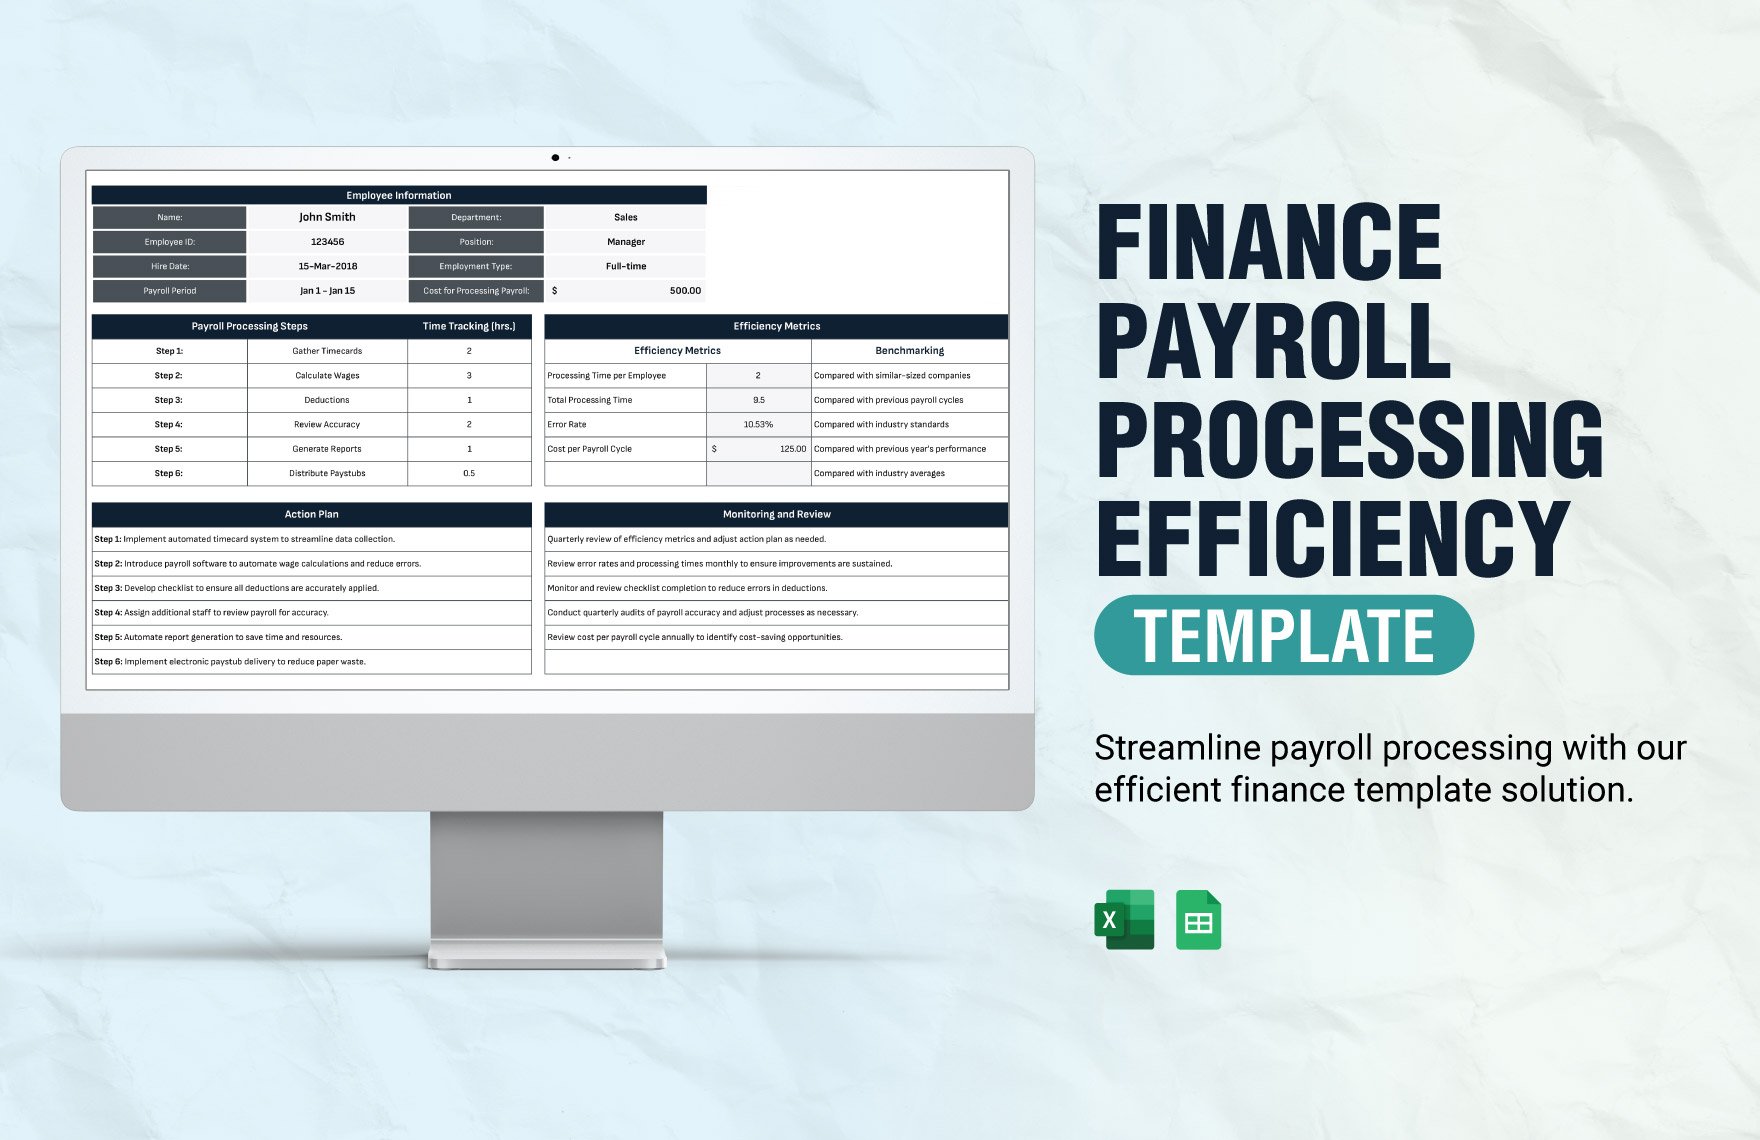 Finance Payroll Processing Efficiency Template in Excel, Google Sheets